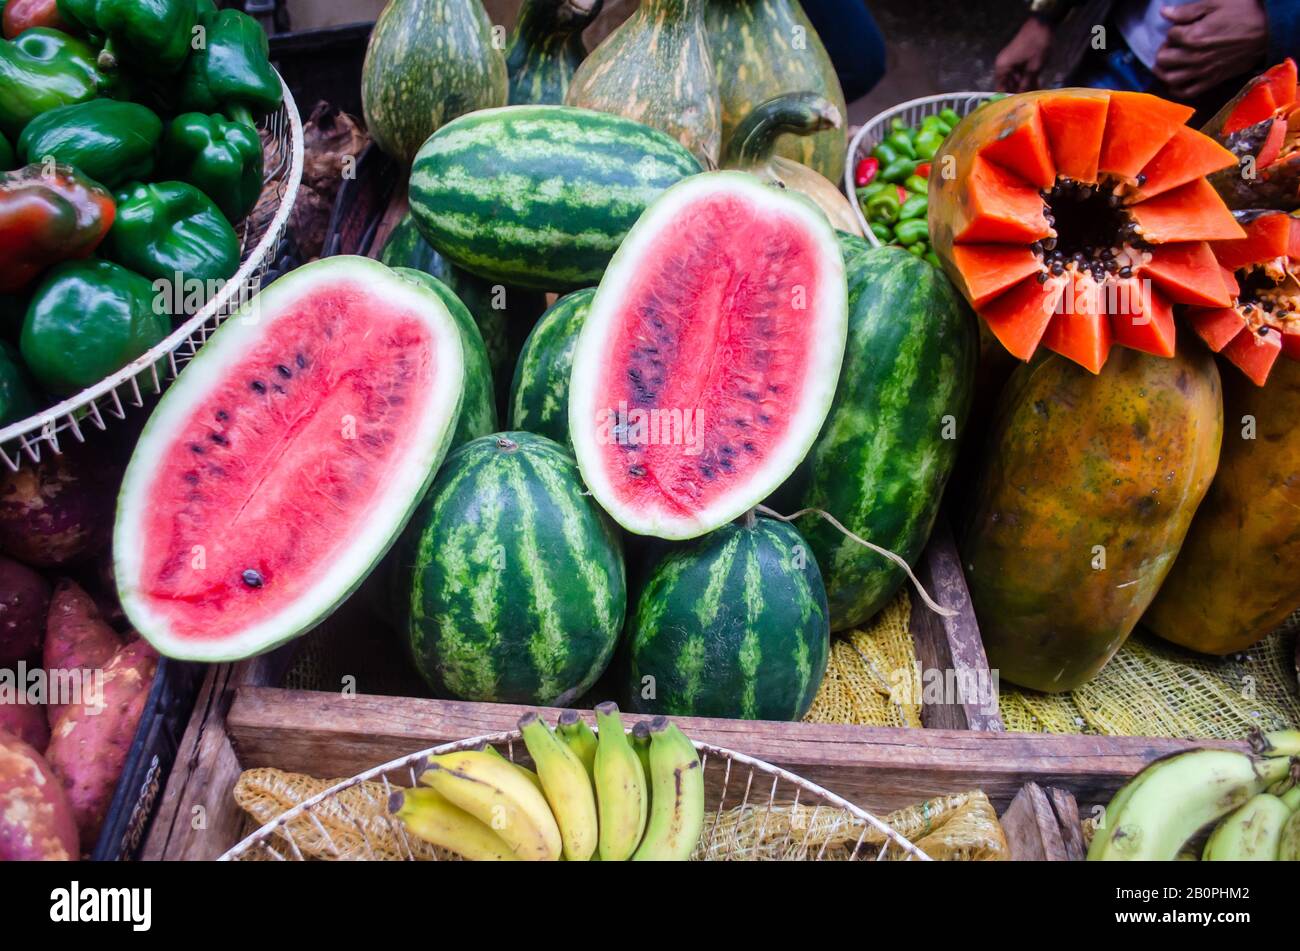 Stall of tropical fruits including watermelon, papaya and bananas. It was seen in Havana, Cuba. Stock Photo